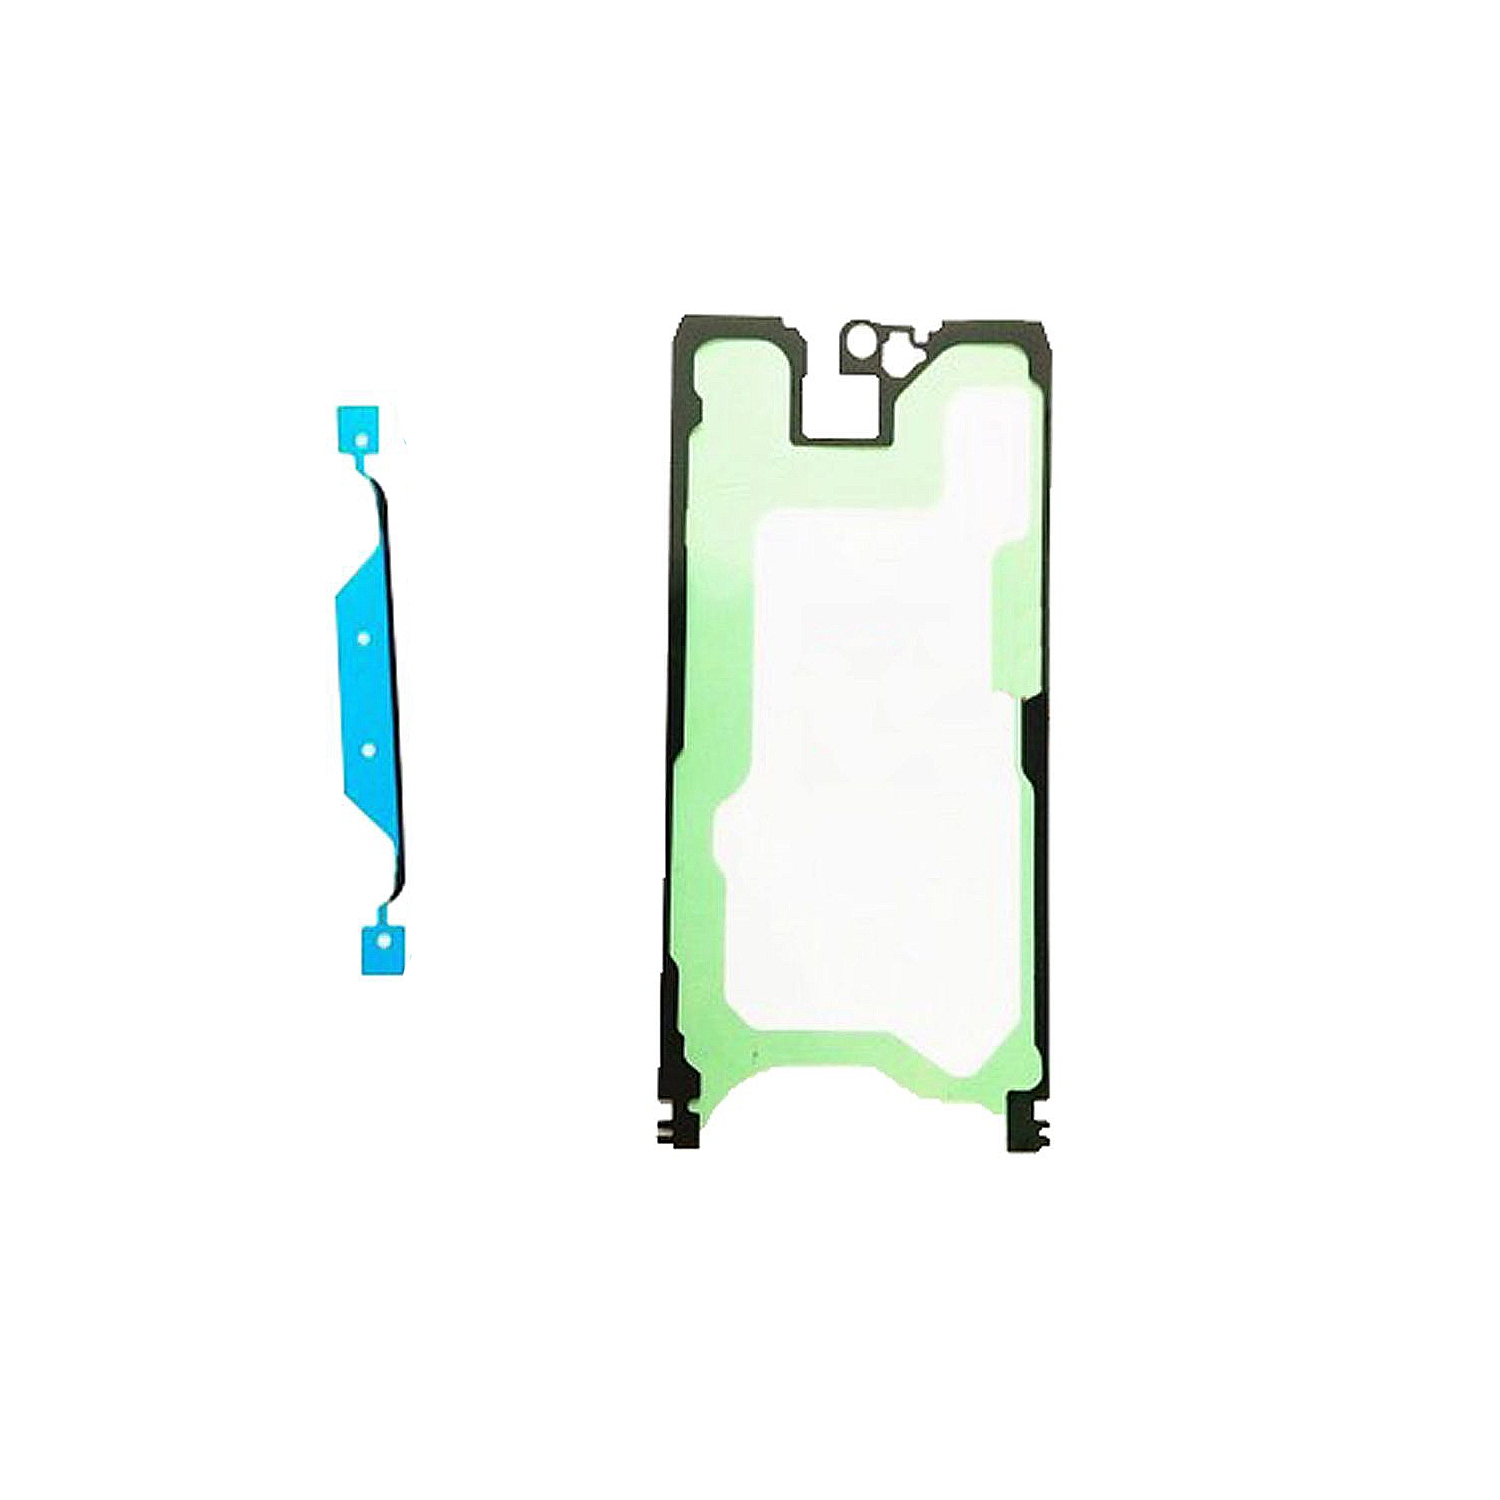 Replacement LCD Adhesive Sticker Tape For Samsung Galaxy Note 10+ Plus (SM-N975W)